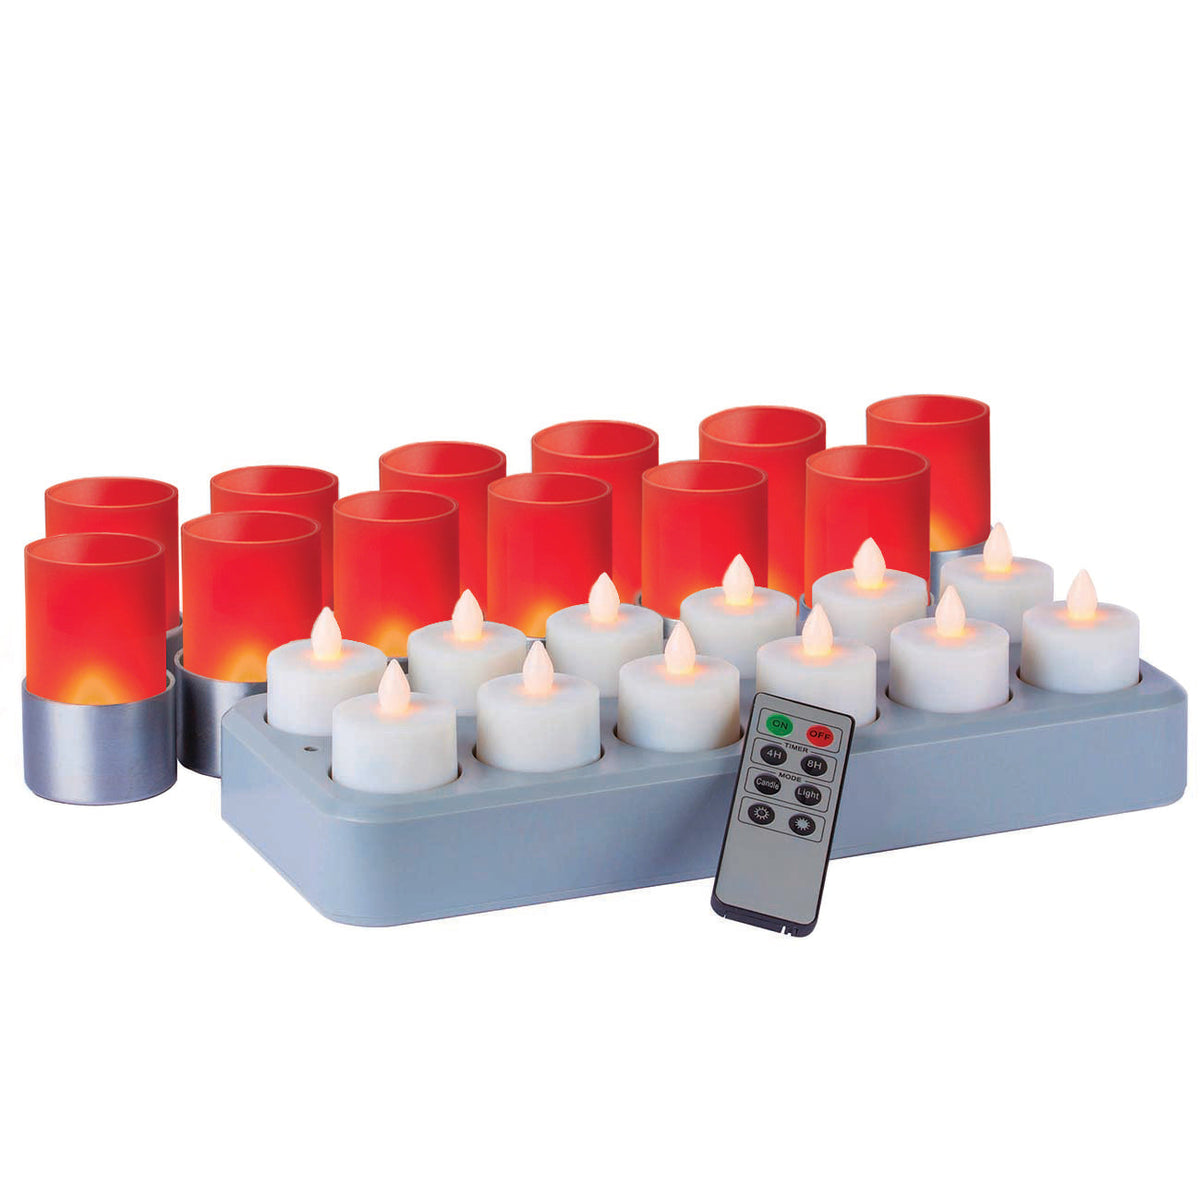 Remote Controlled set of 12 Rechargeable LED Flicker Tealights in Candlelight Colour with Frosted Red Ambeo Lamps